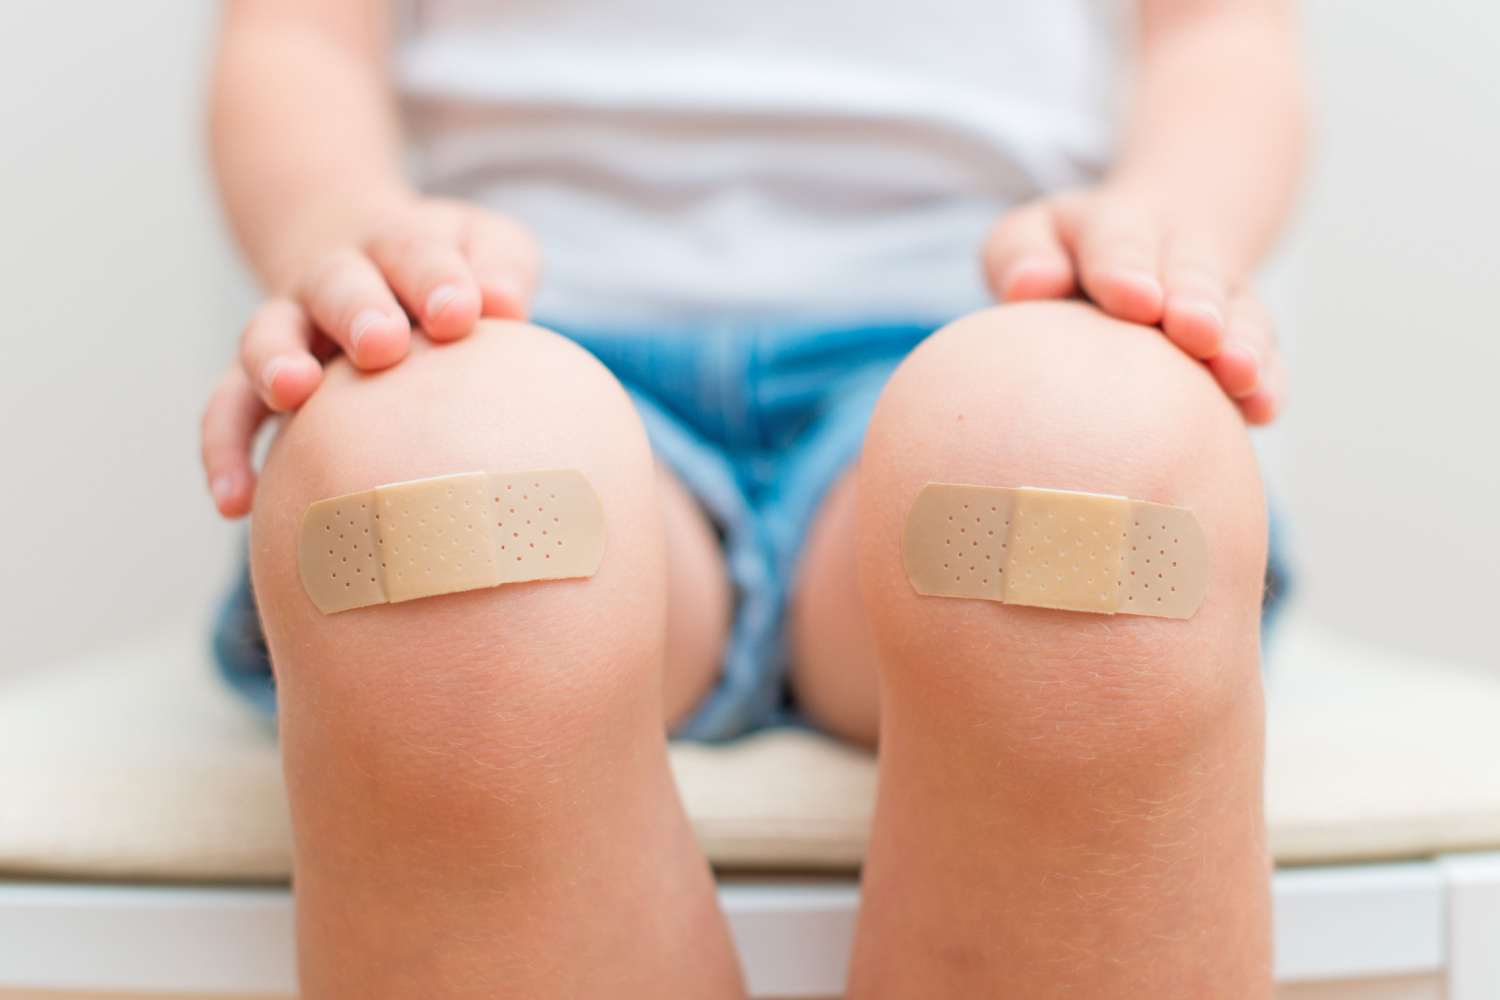 Adhesive bandages or band aids are important to keep in toddler first aid kit